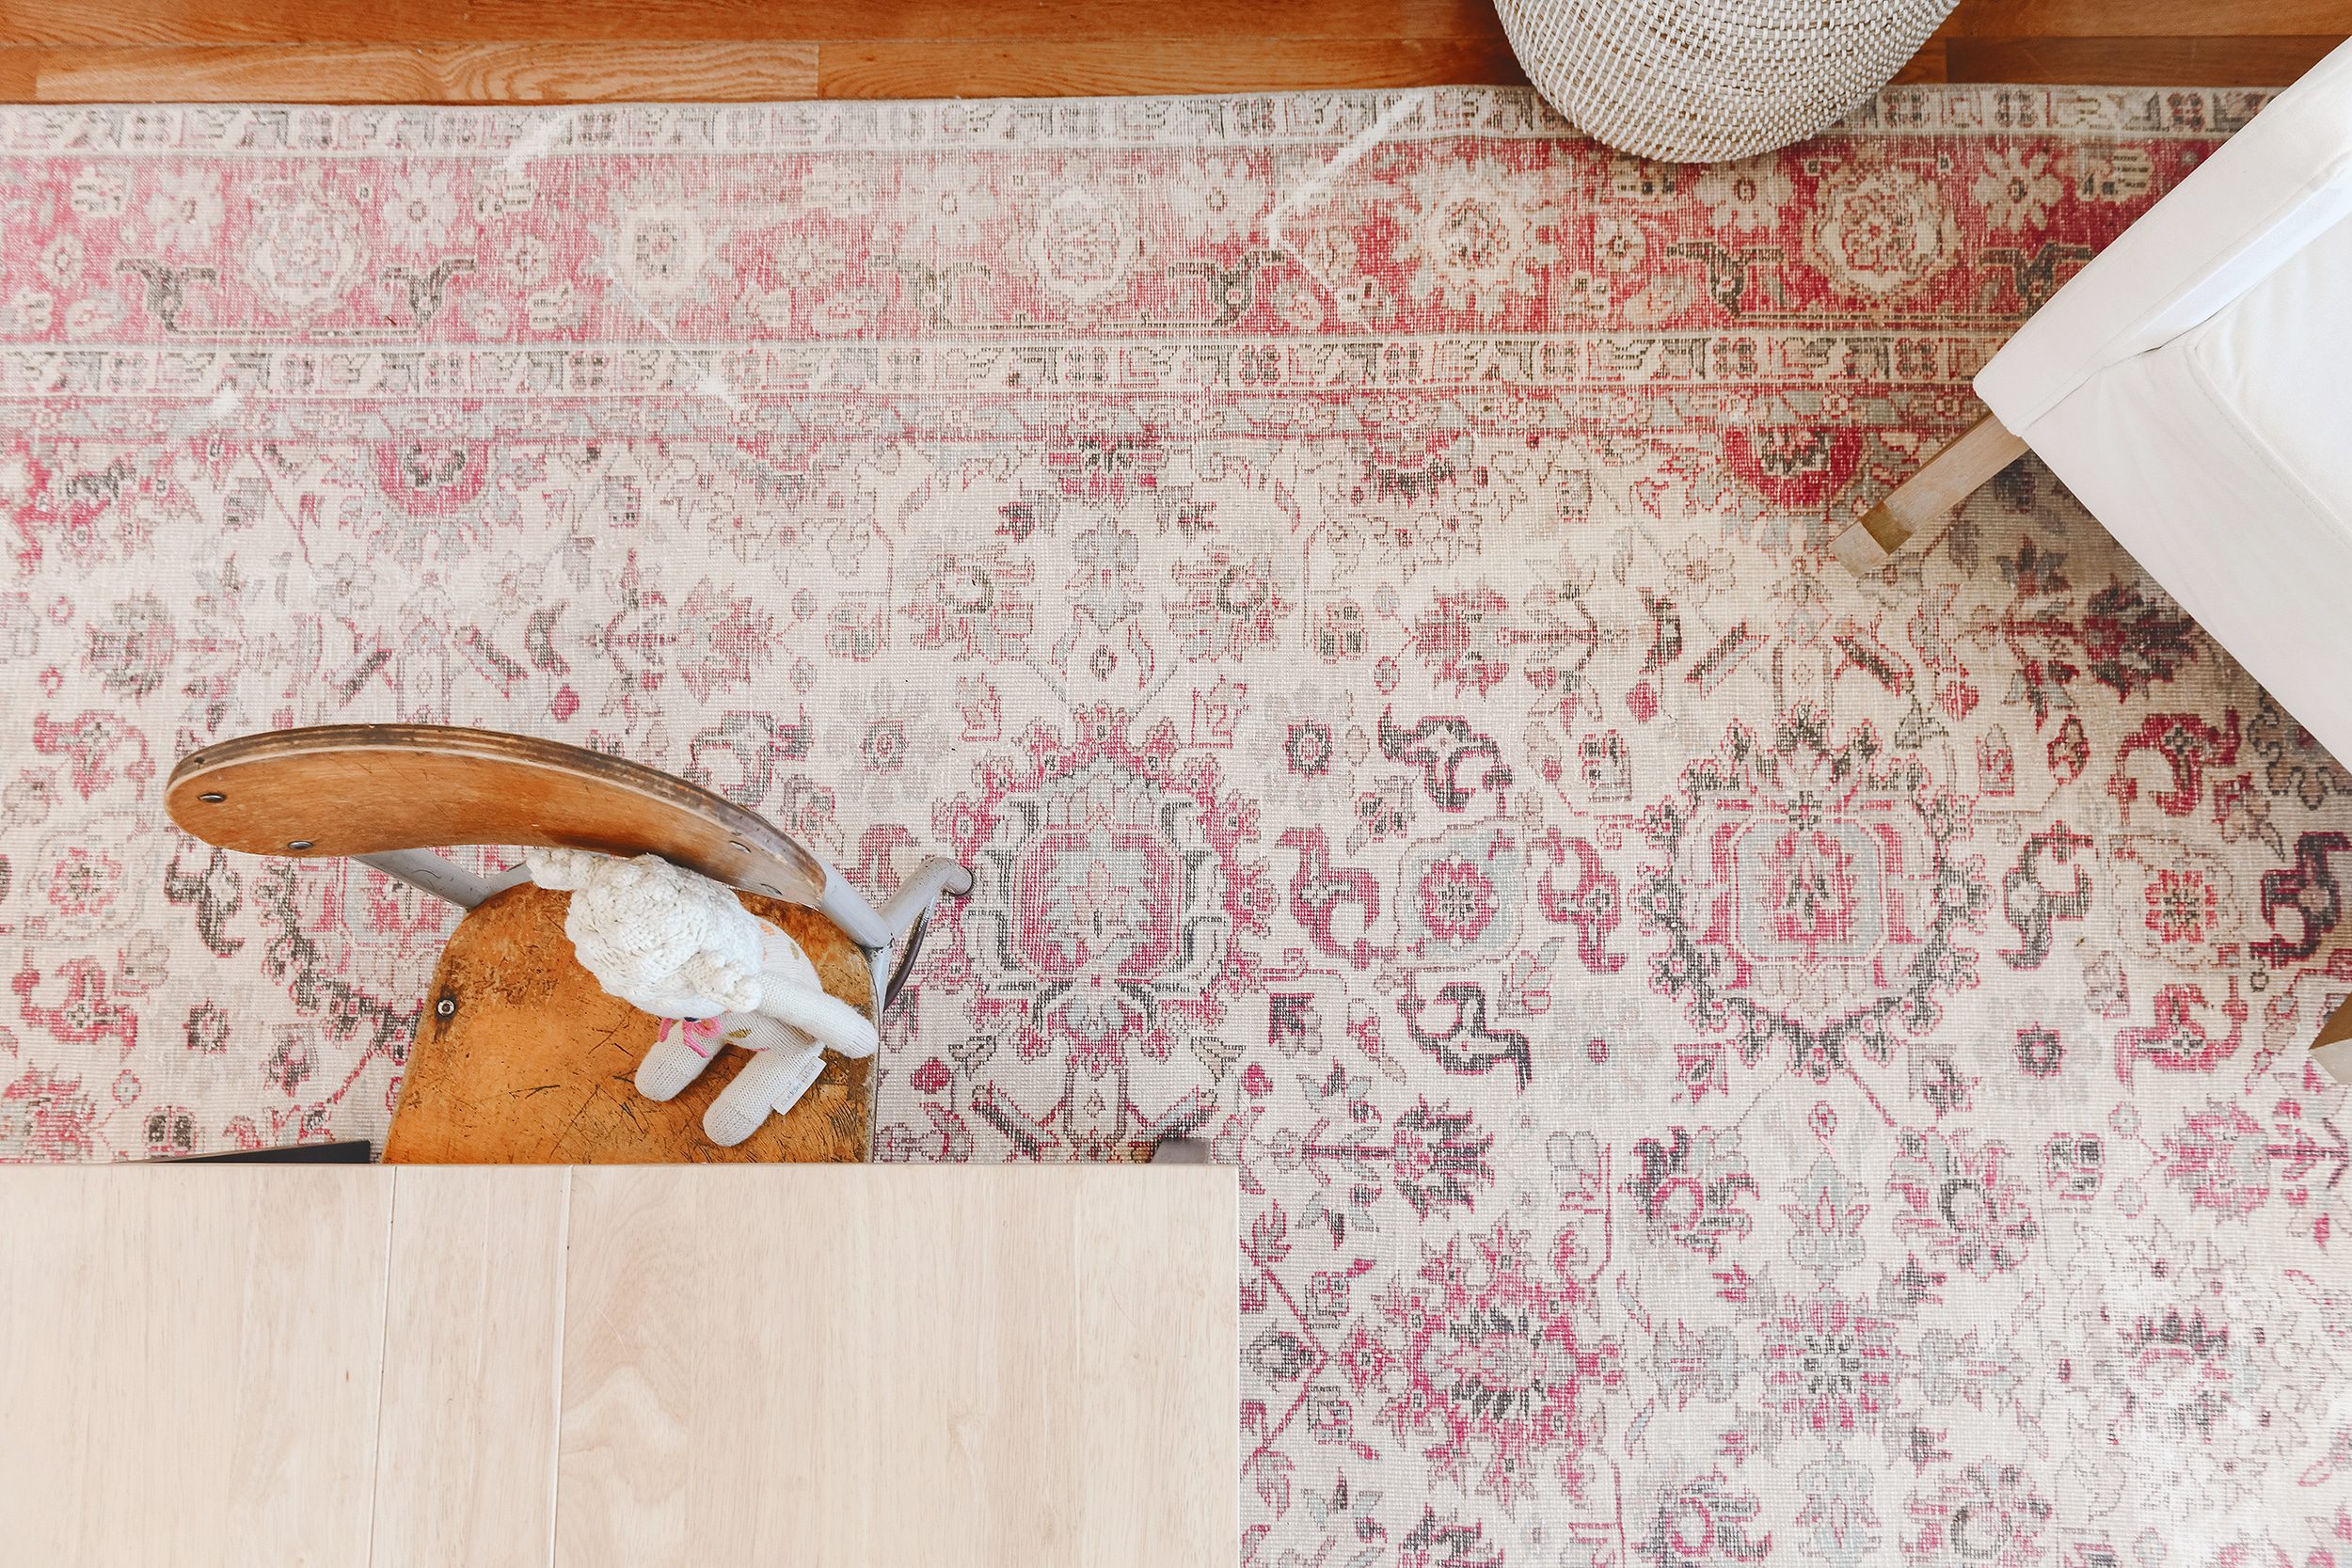 A detail of our Revival Rugs purchase | What to Look for When Buying a Vintage Rug, via Yellow Brick Home